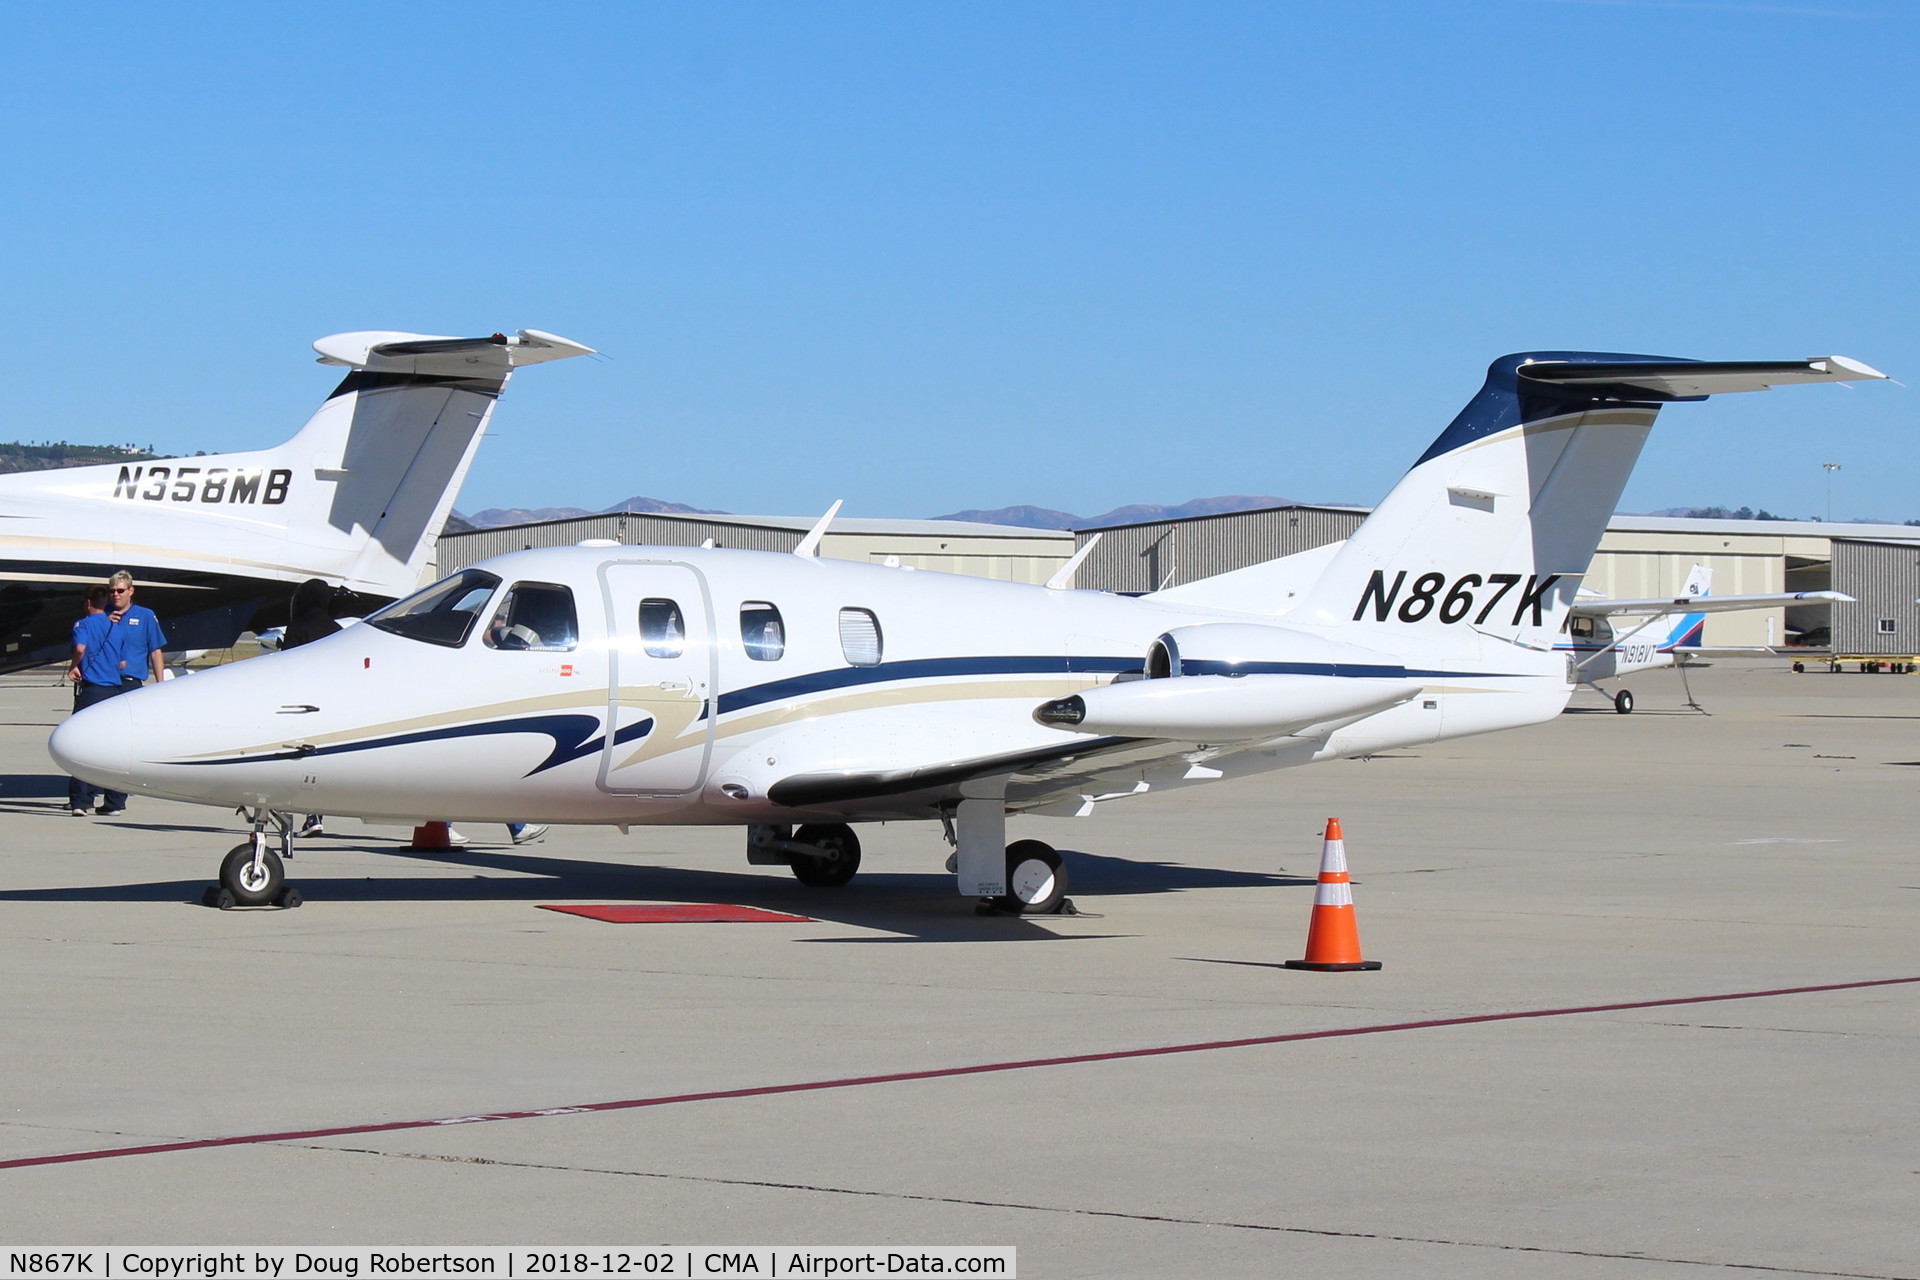 N867K, 2008 Eclipse Aviation Corp EA500 C/N 000239, 2008 Eclipse Aviation EA-500 very light jet, two P&W(C)PW610F-A flat-rated to 900 lb ft each with FADEC, 6 seats, on Transient Ramp